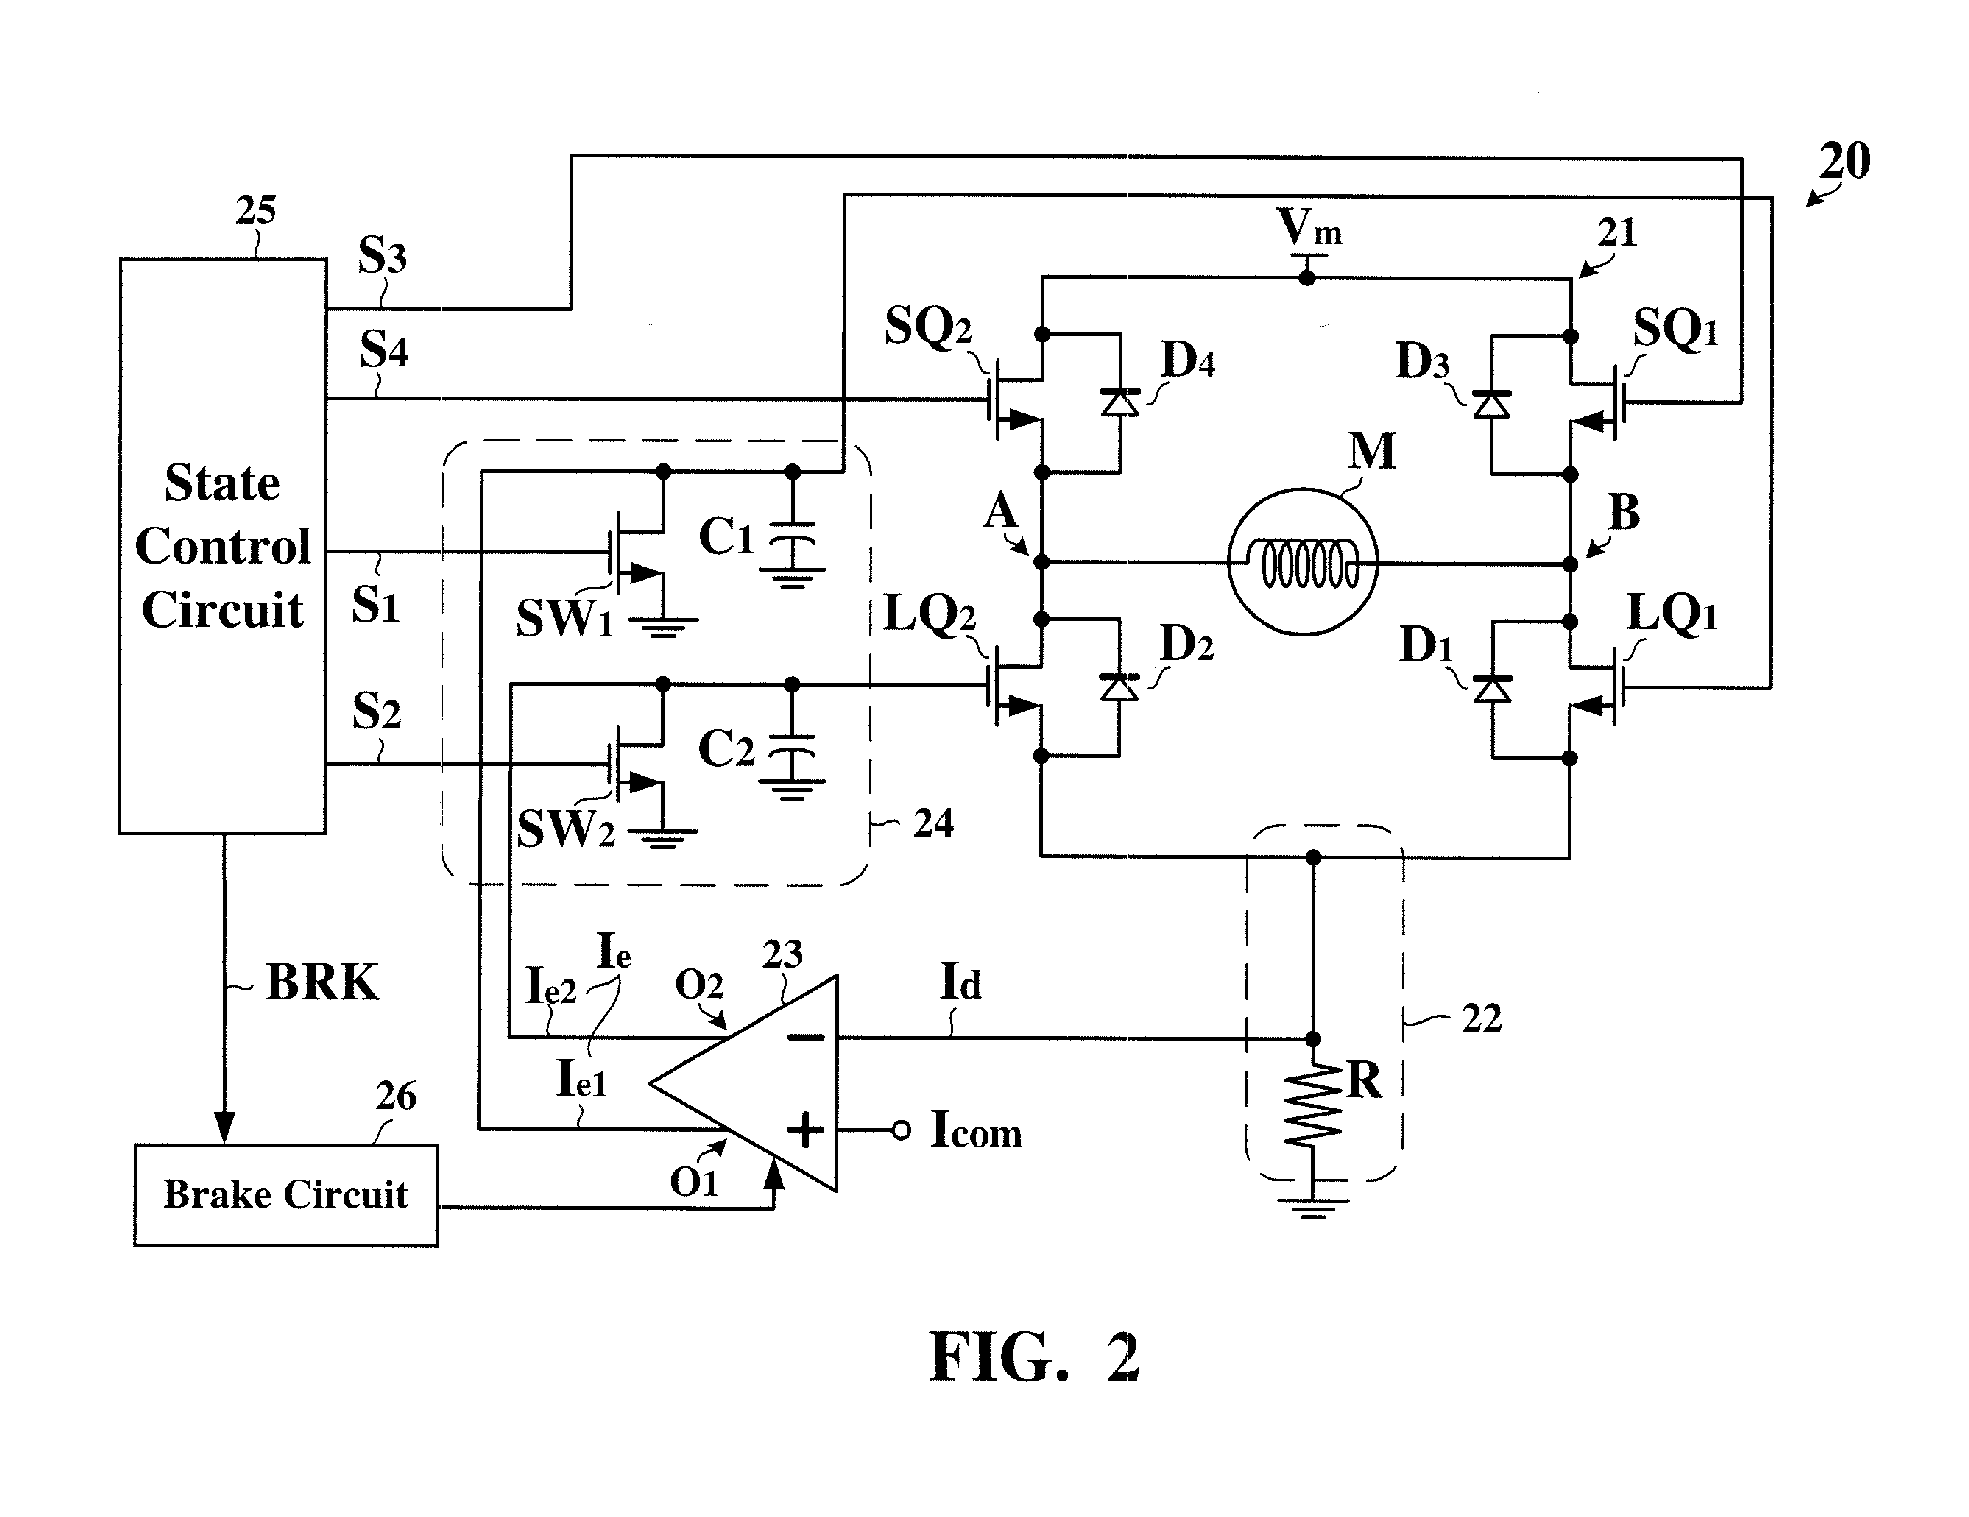 Motor control circuit for supplying a controllable driving current